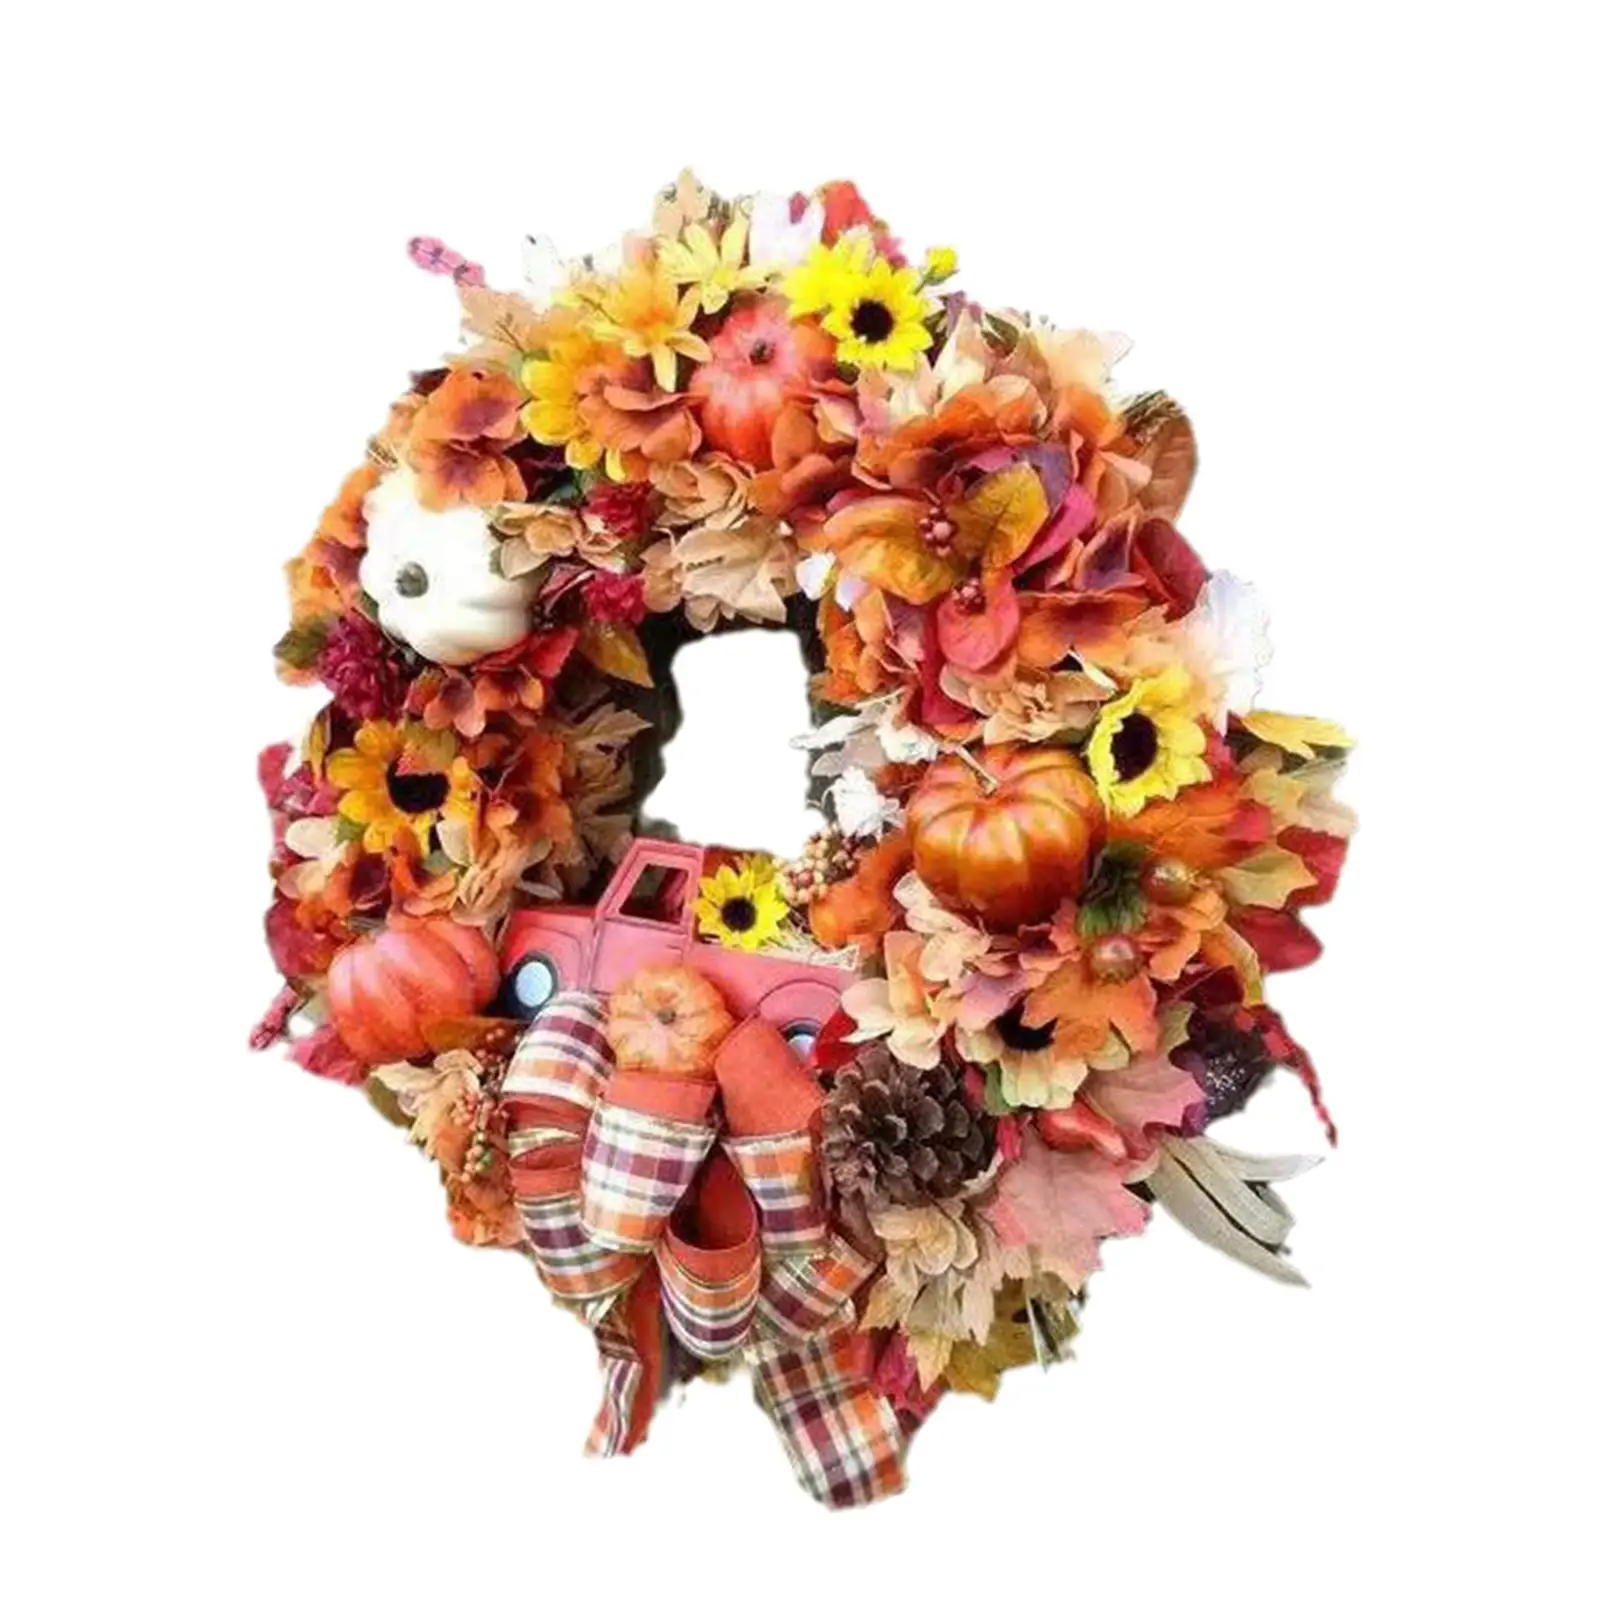 

17 inch Artificial Fall Harvest Harvest Autumn Wreath with Leaves and Berries for Home Party Porch Halloween Showcase Window